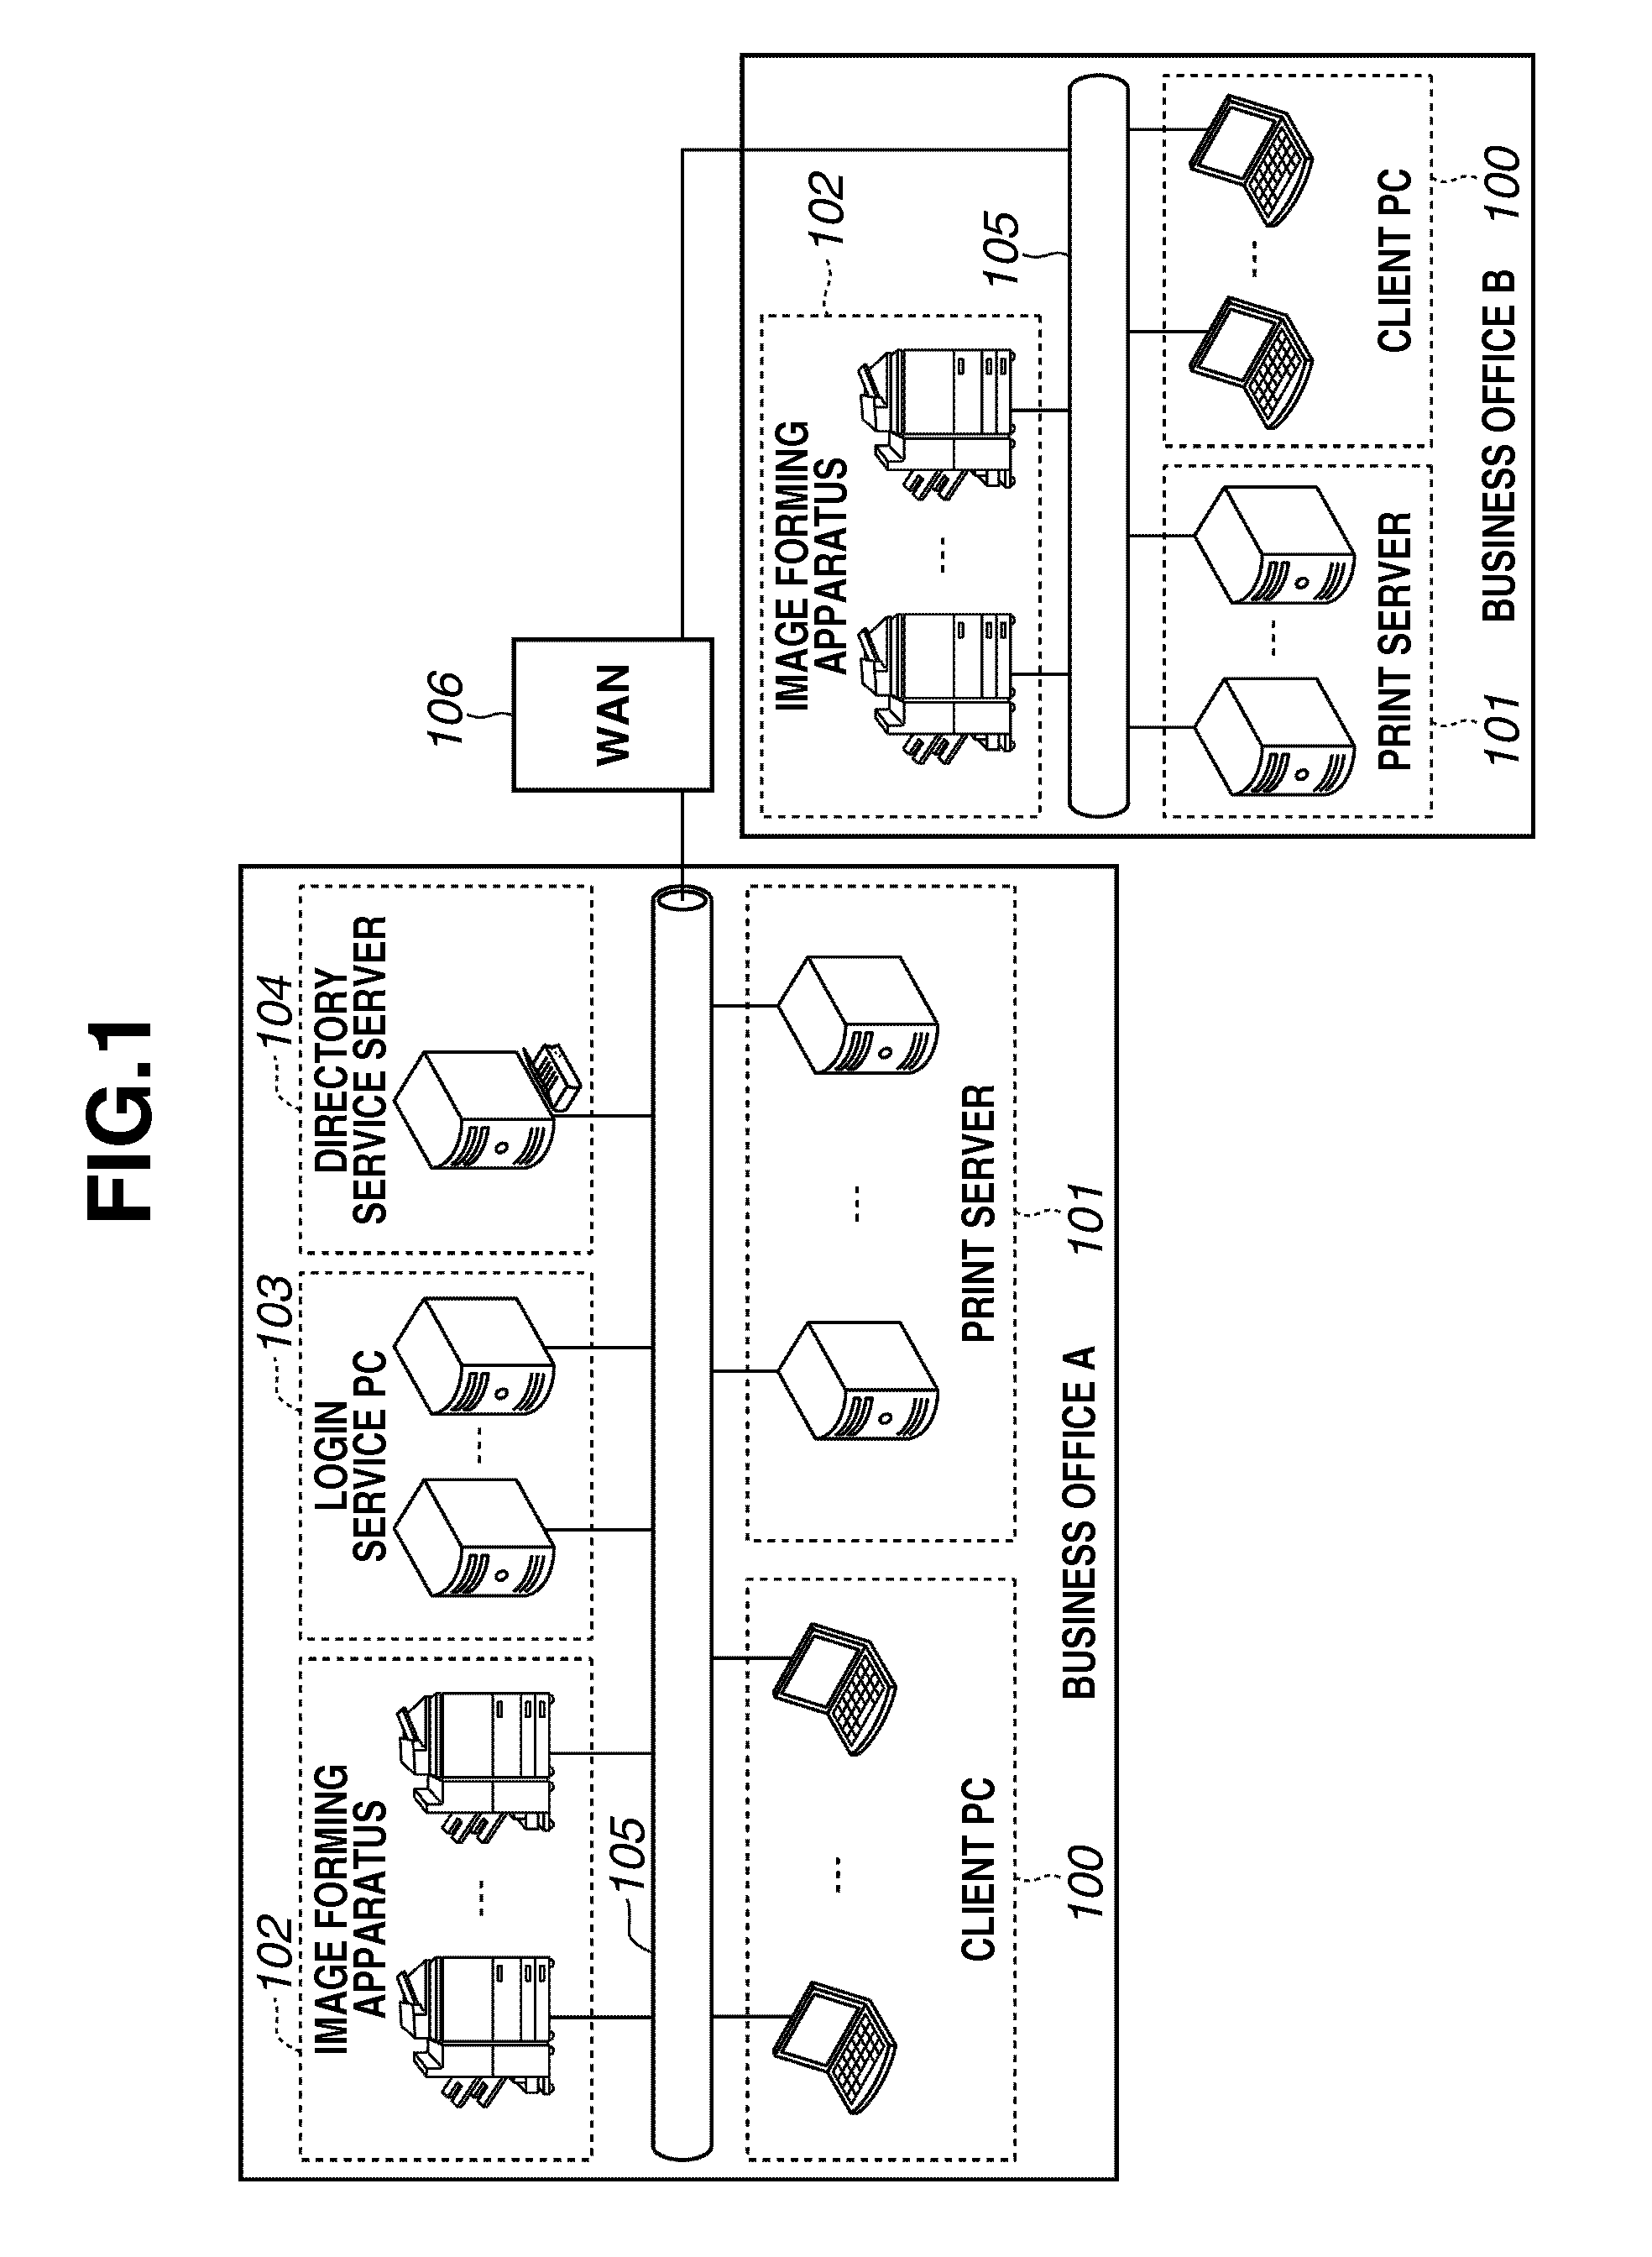 Information processing apparatus, printing system, and method for controlling the same